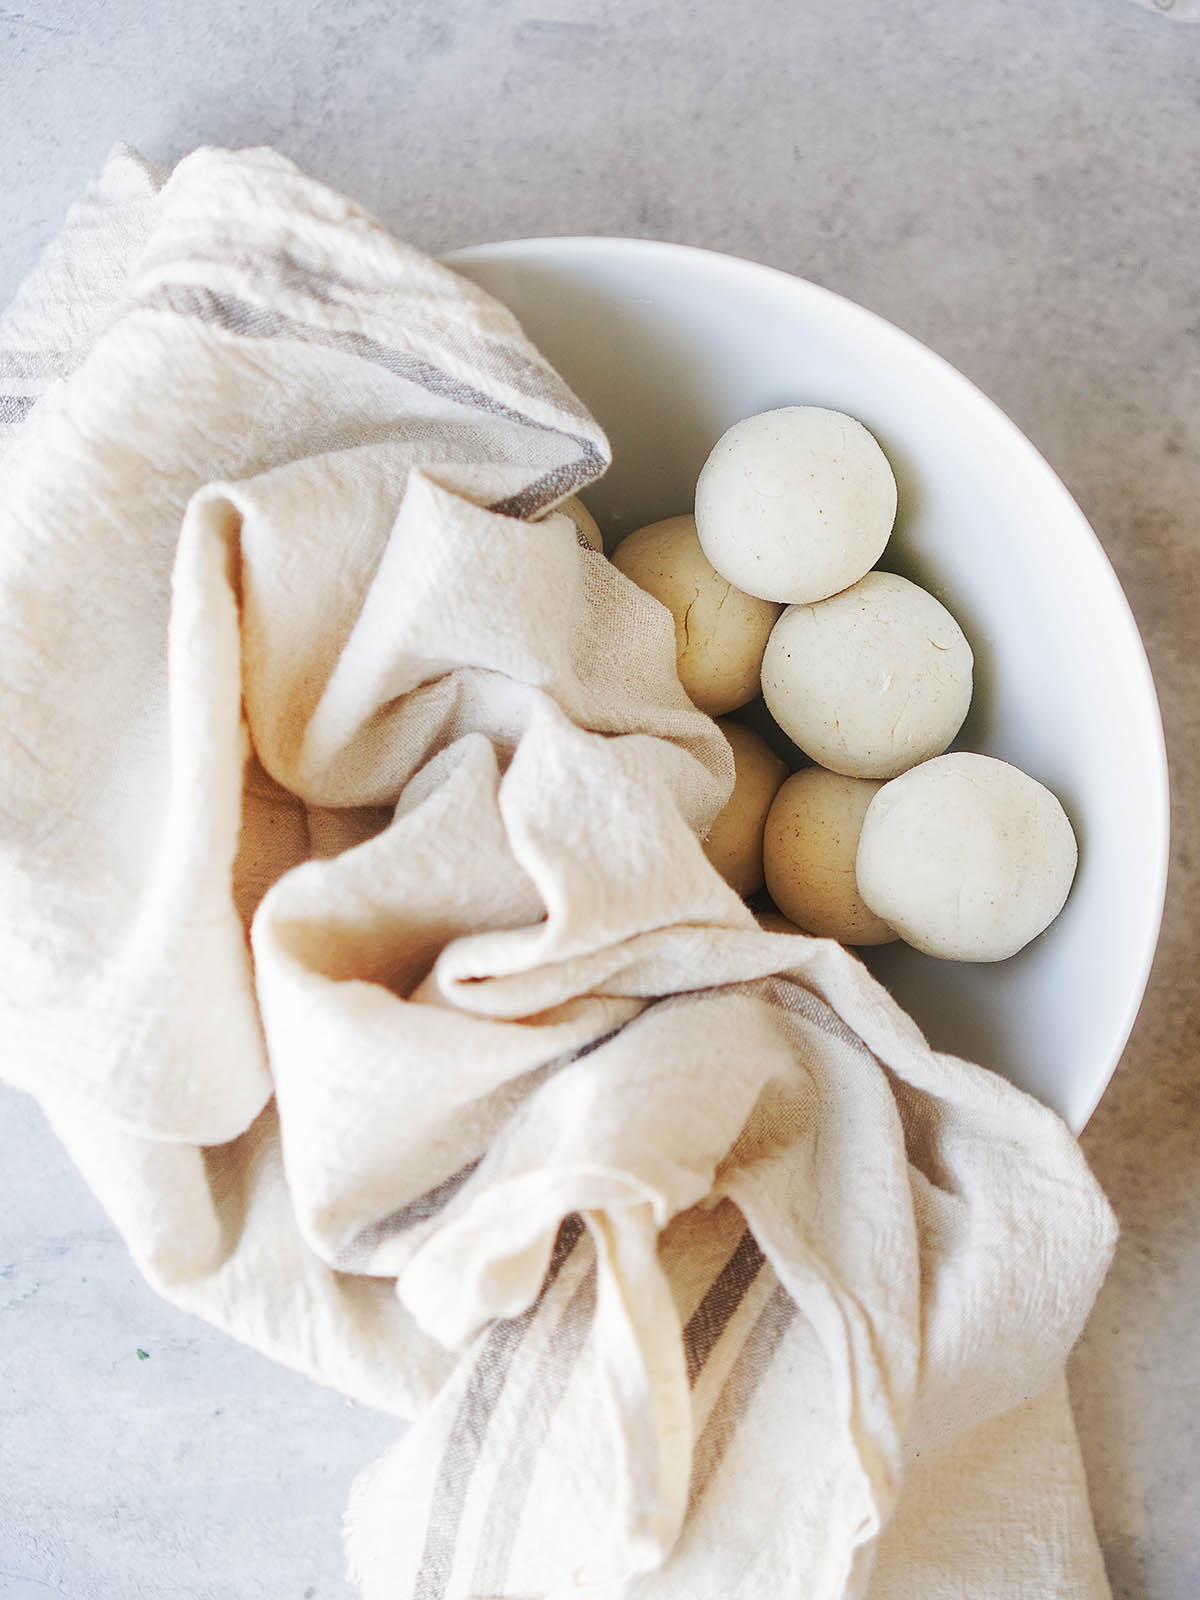 Tortilla dough balls in a white bowl covered with a kitchen towel.